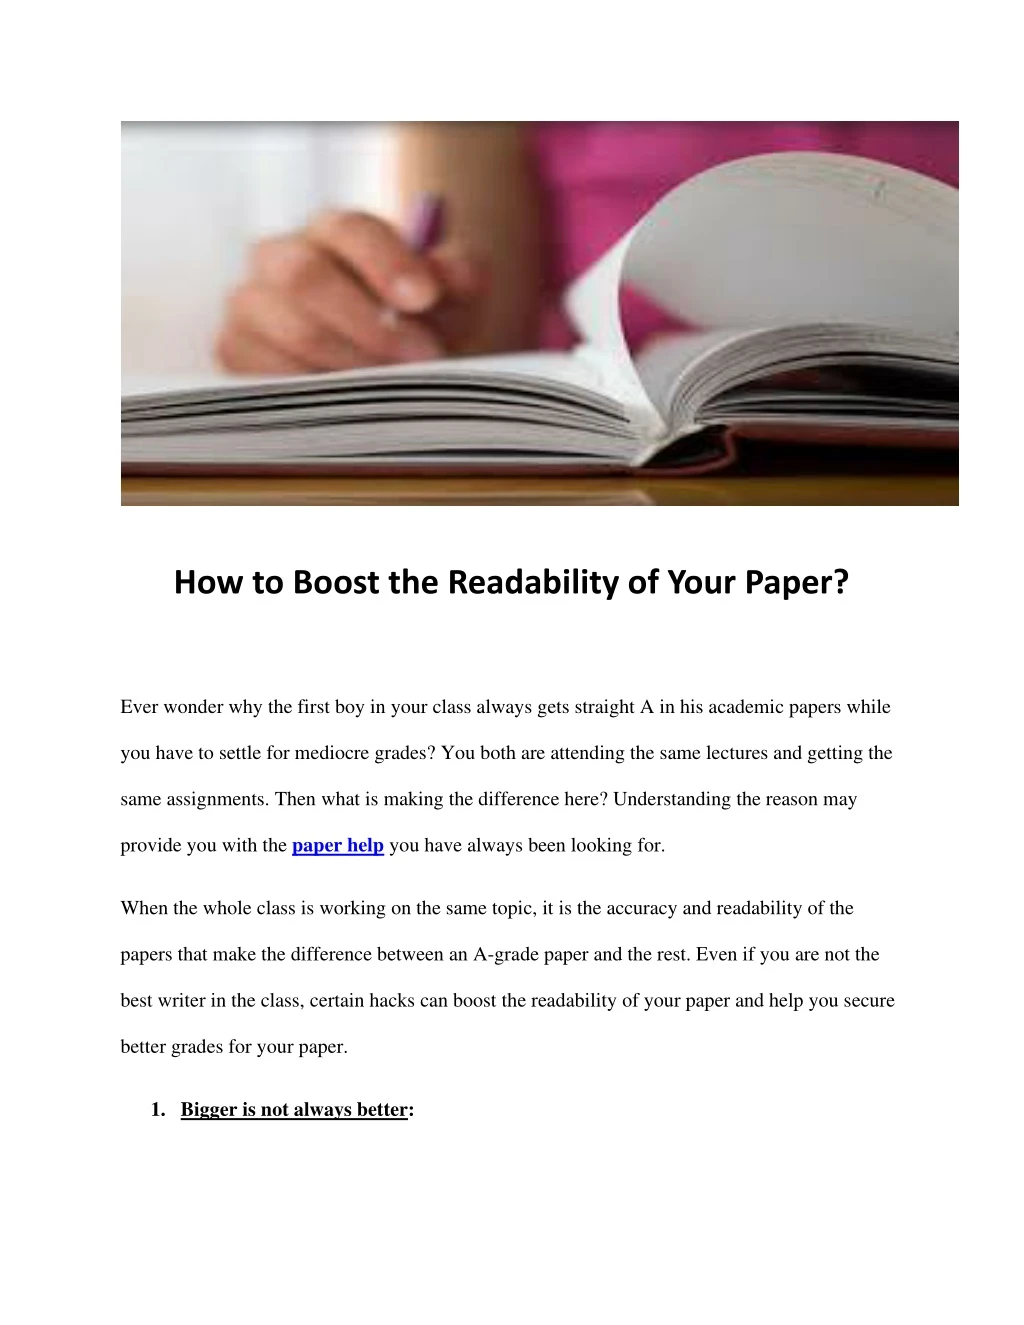 how to boost the readability of your paper